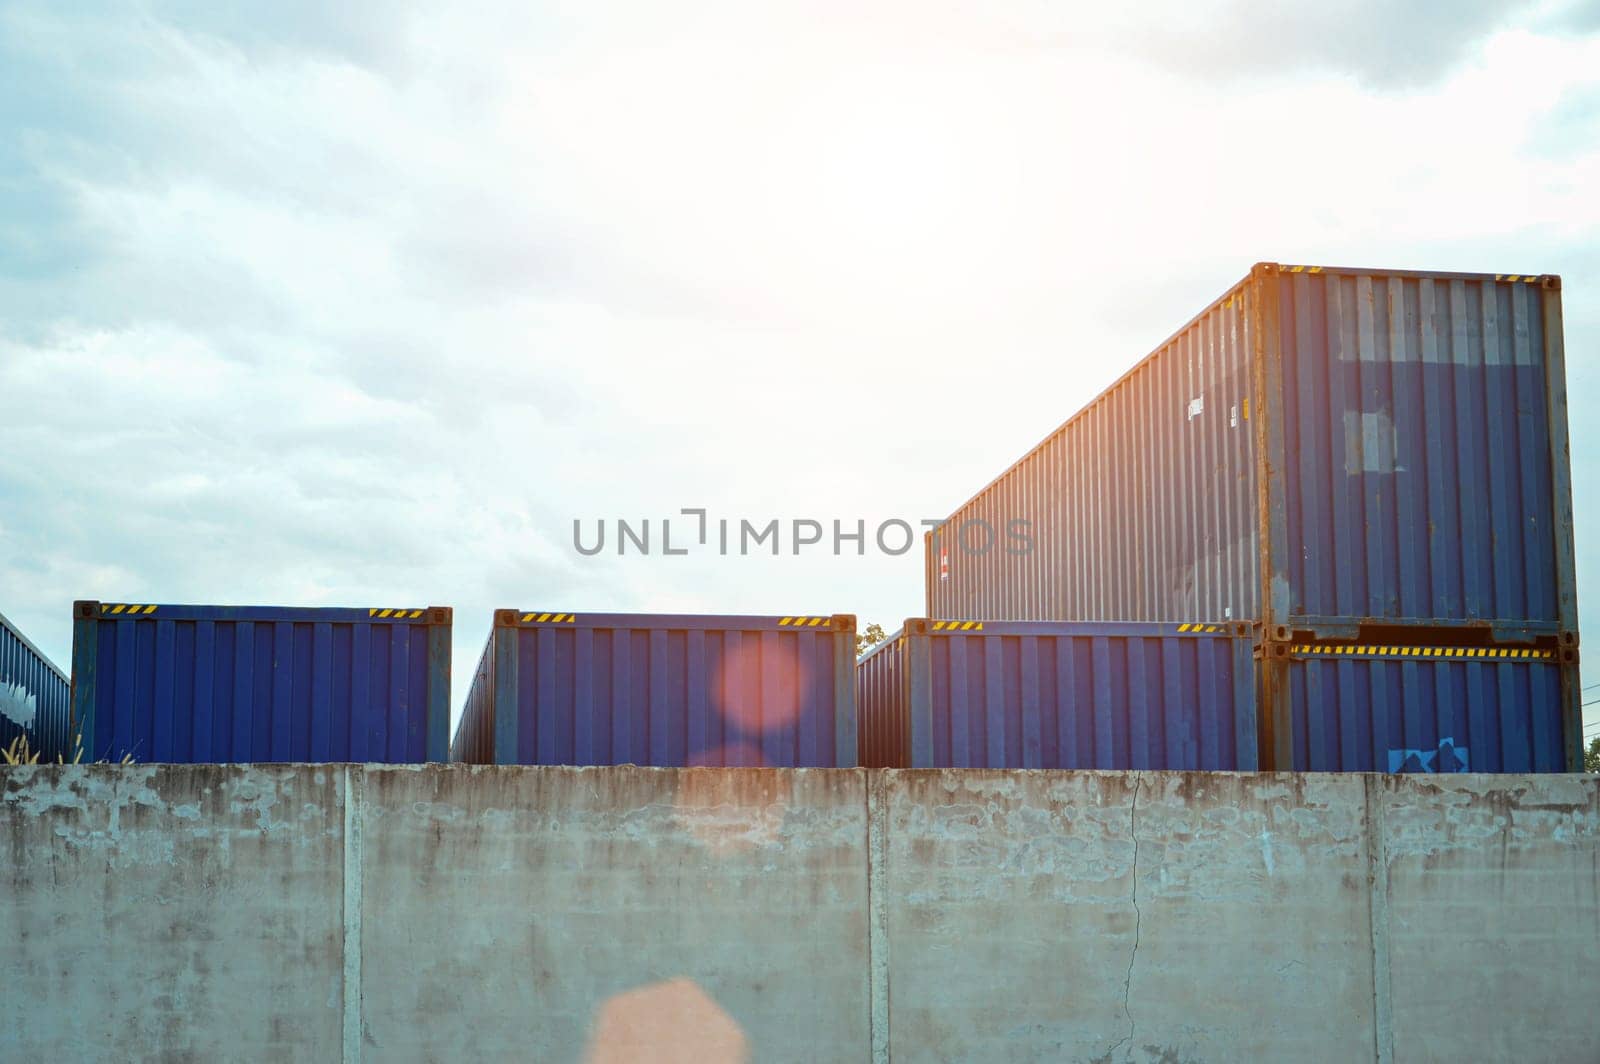 1-9-2022, Chonburi, Thailand, large containers Used for international shipments by boonruen